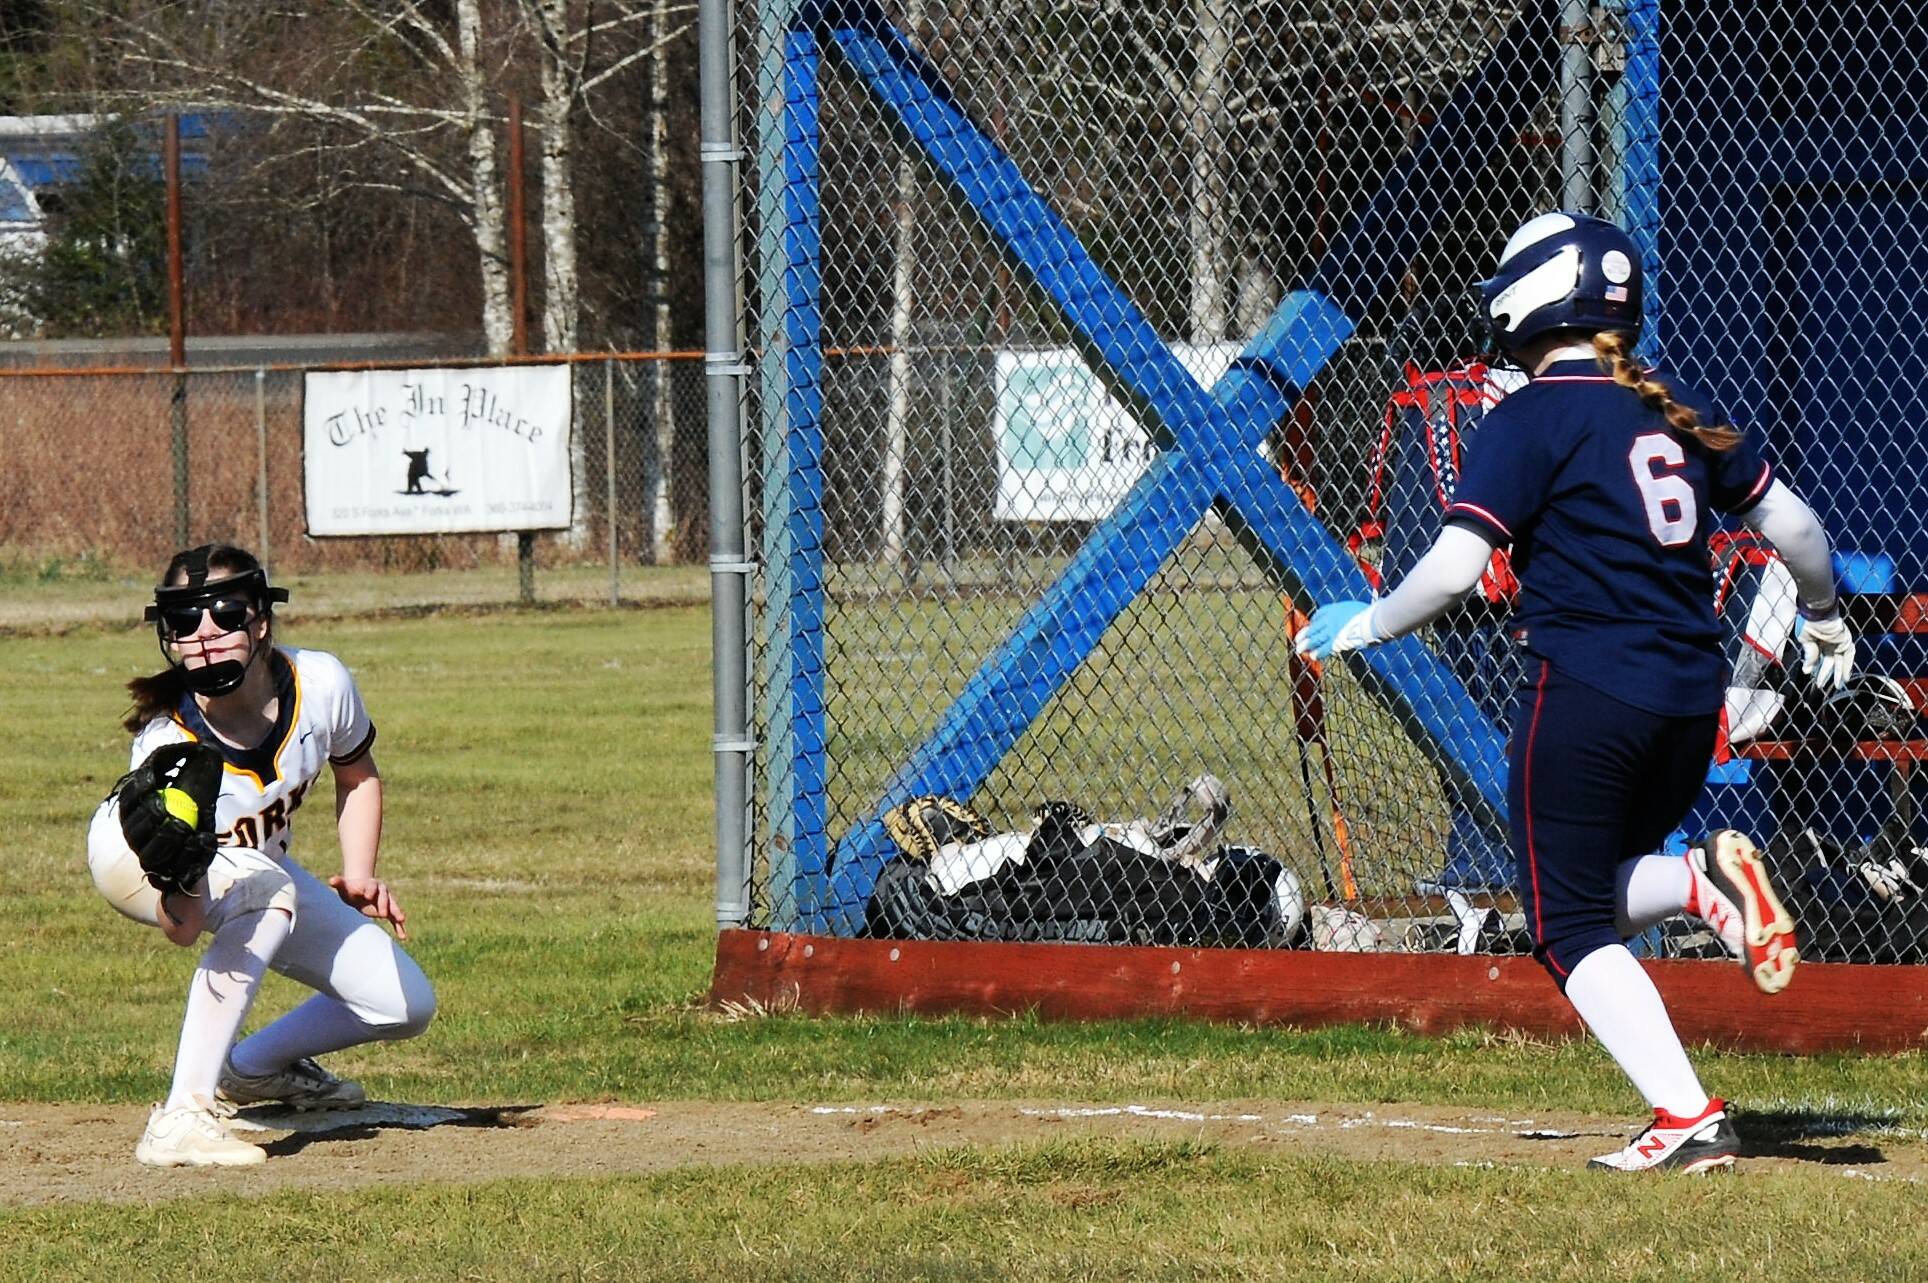 Second baseman Bailey Johnson covers first base for the out on a bunt attempt.